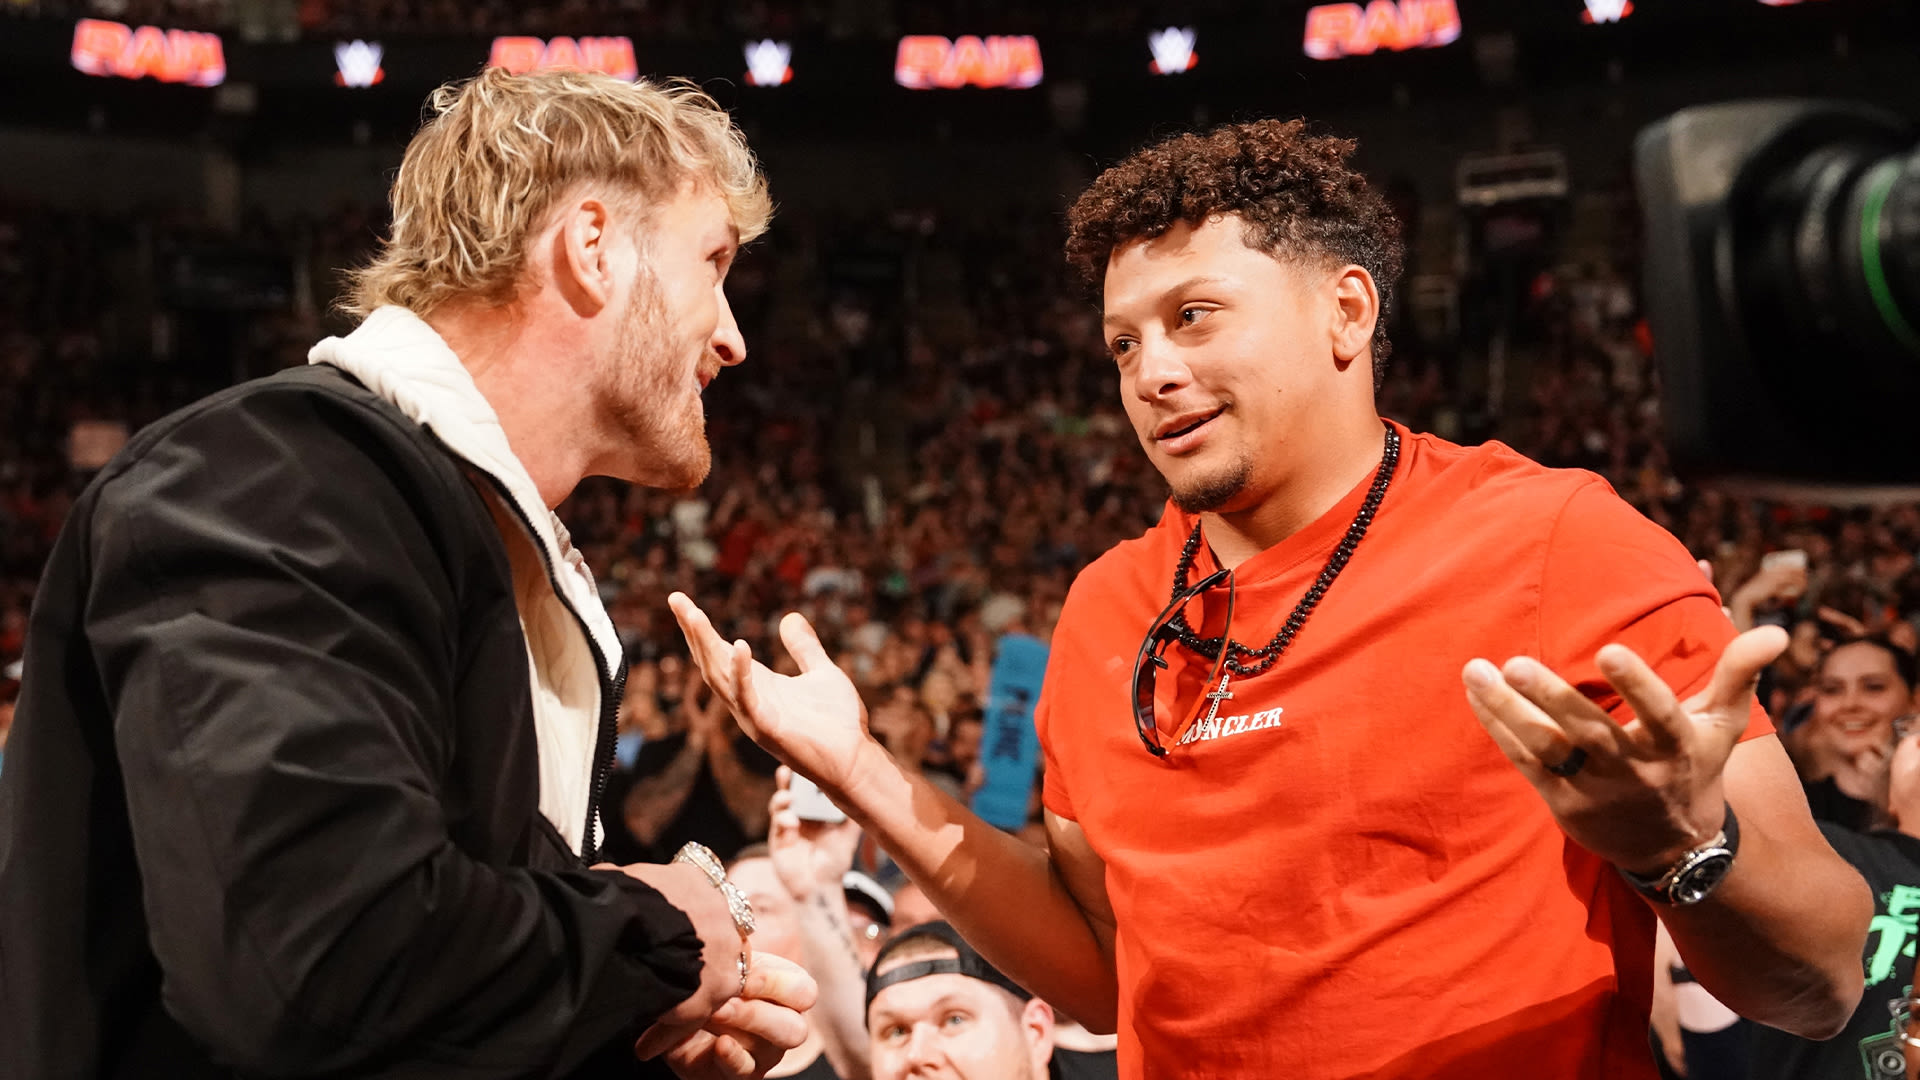 Mahomes helps out Logan Paul at WWE Raw as fans gasp 'he's a villain now'